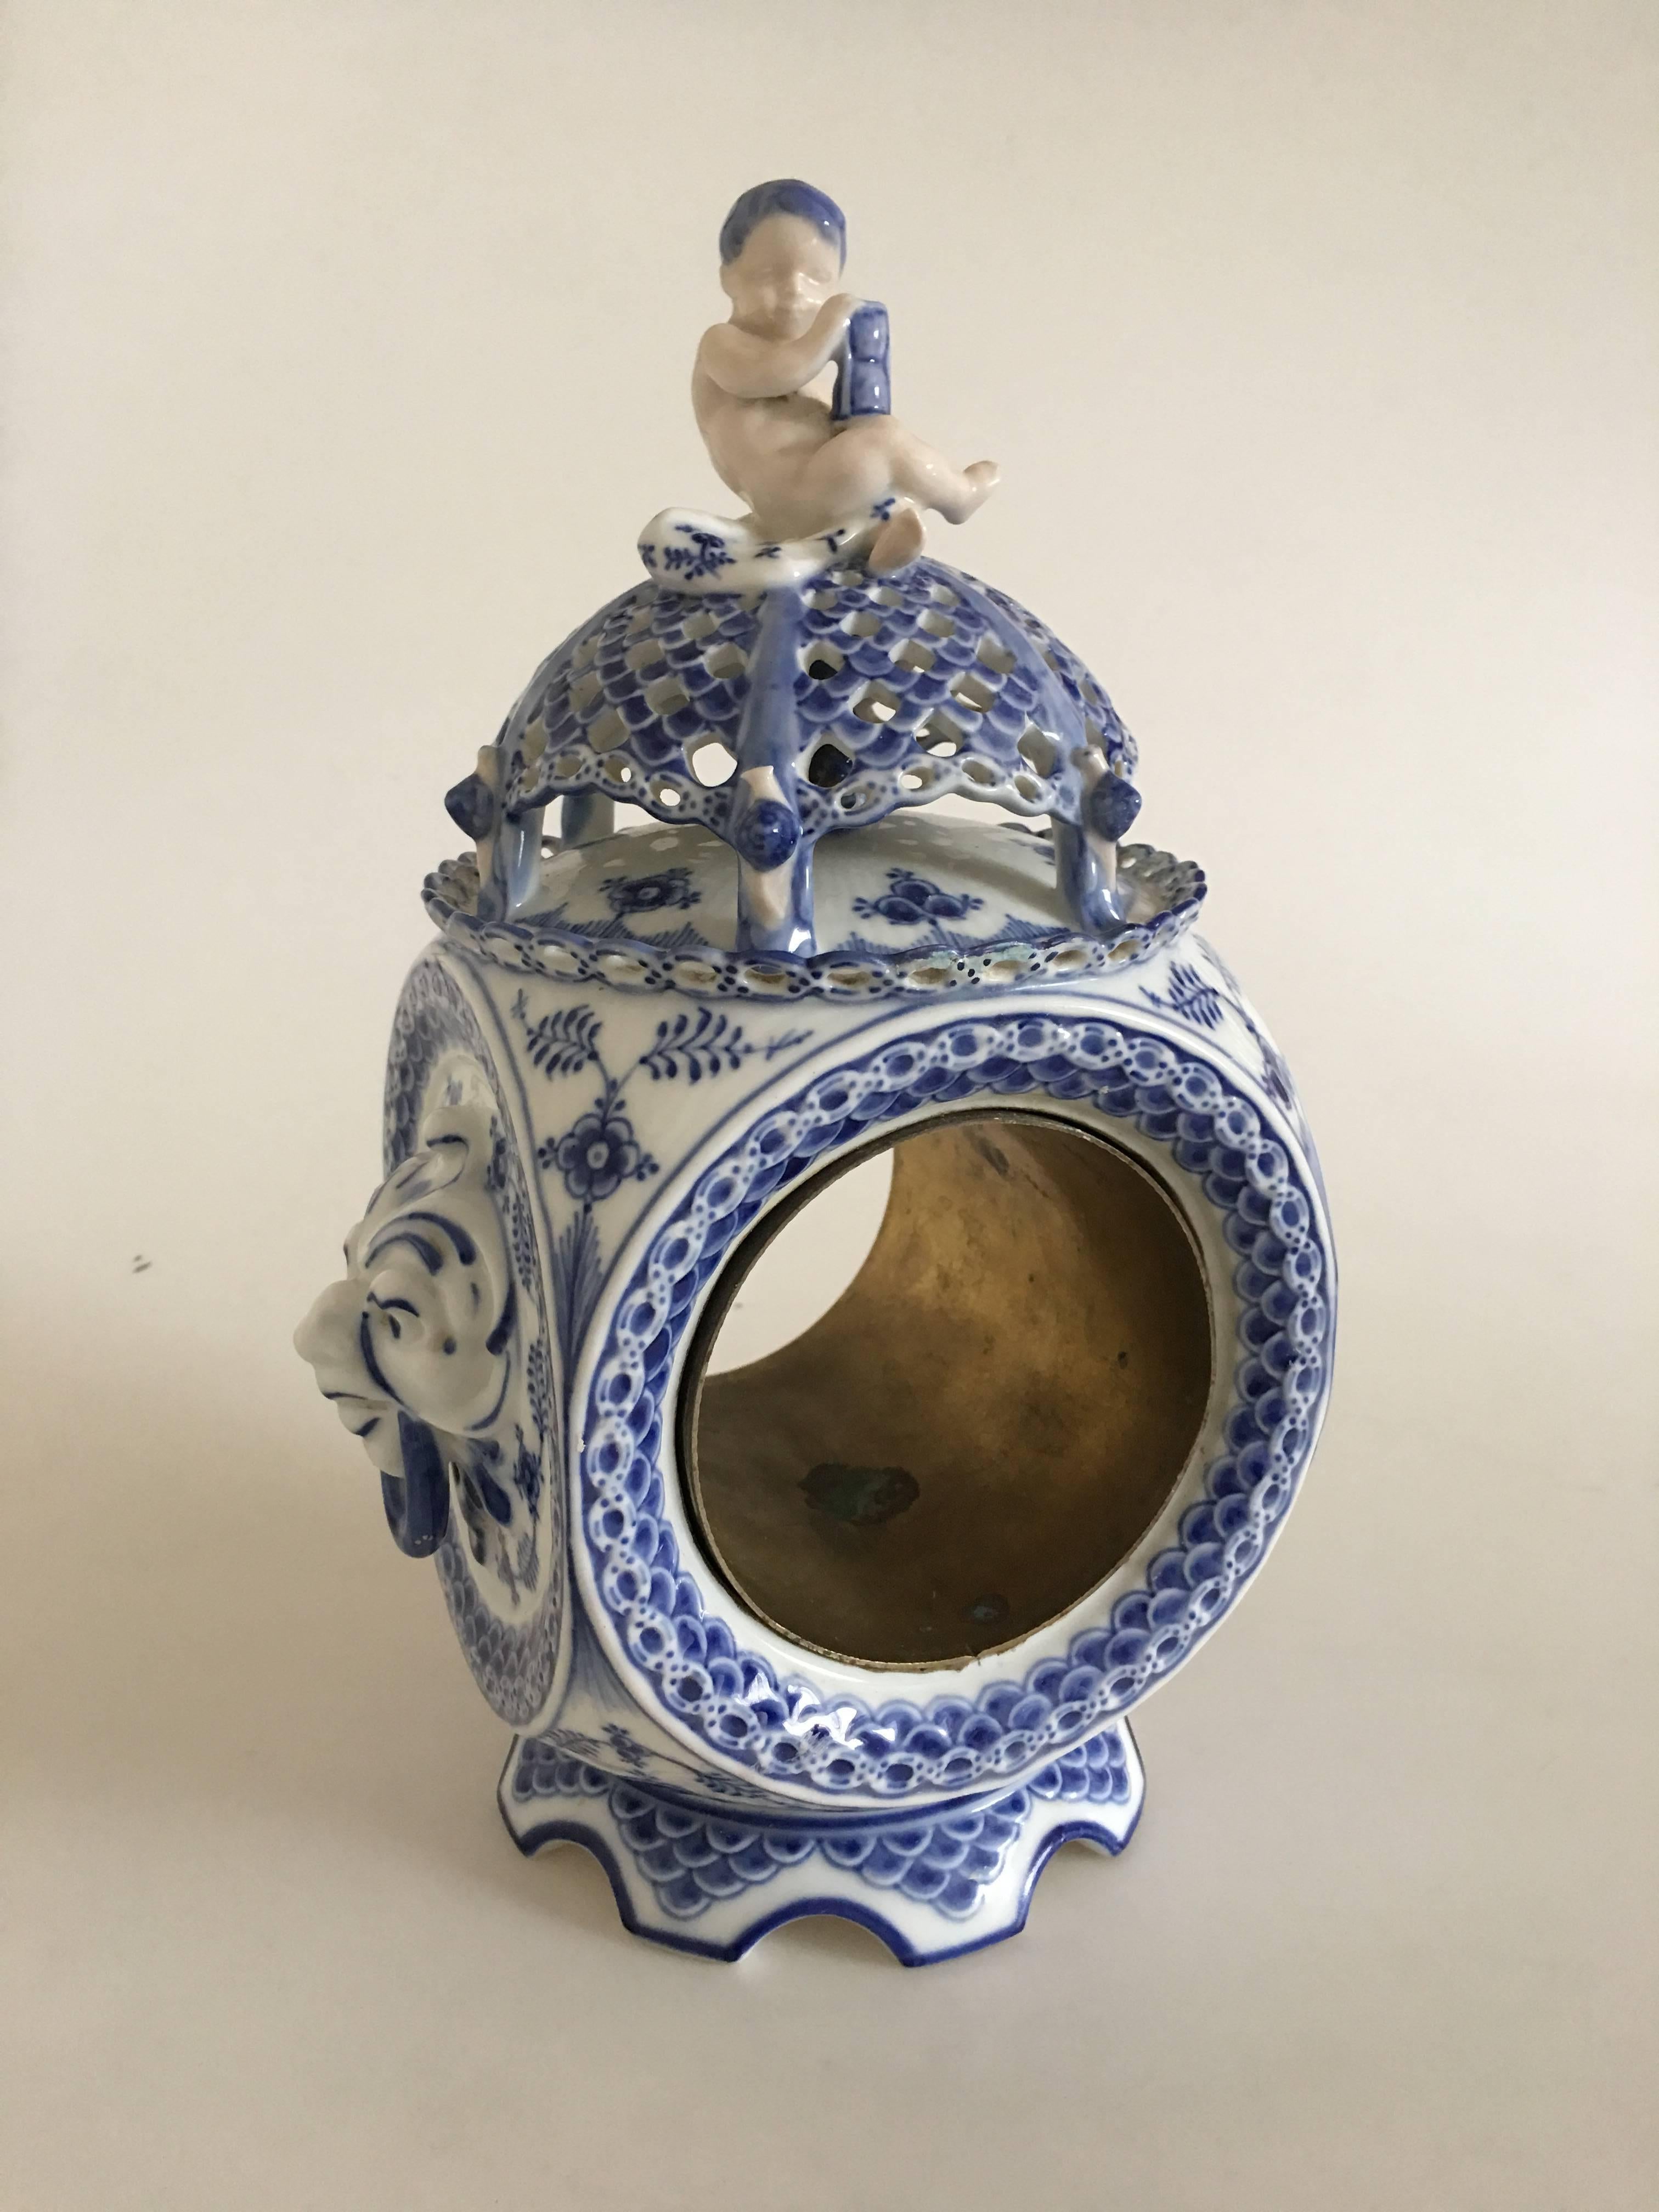 “Blue Fluted Full Lace” porcelain clock decorated in underglaze blue. Royal Copenhagen 1017, end of 19th century. Measures: H. 28 cm. The clock has larger repairment at the bottom foot piece, and a minor in comparison on the top lace border. Look at